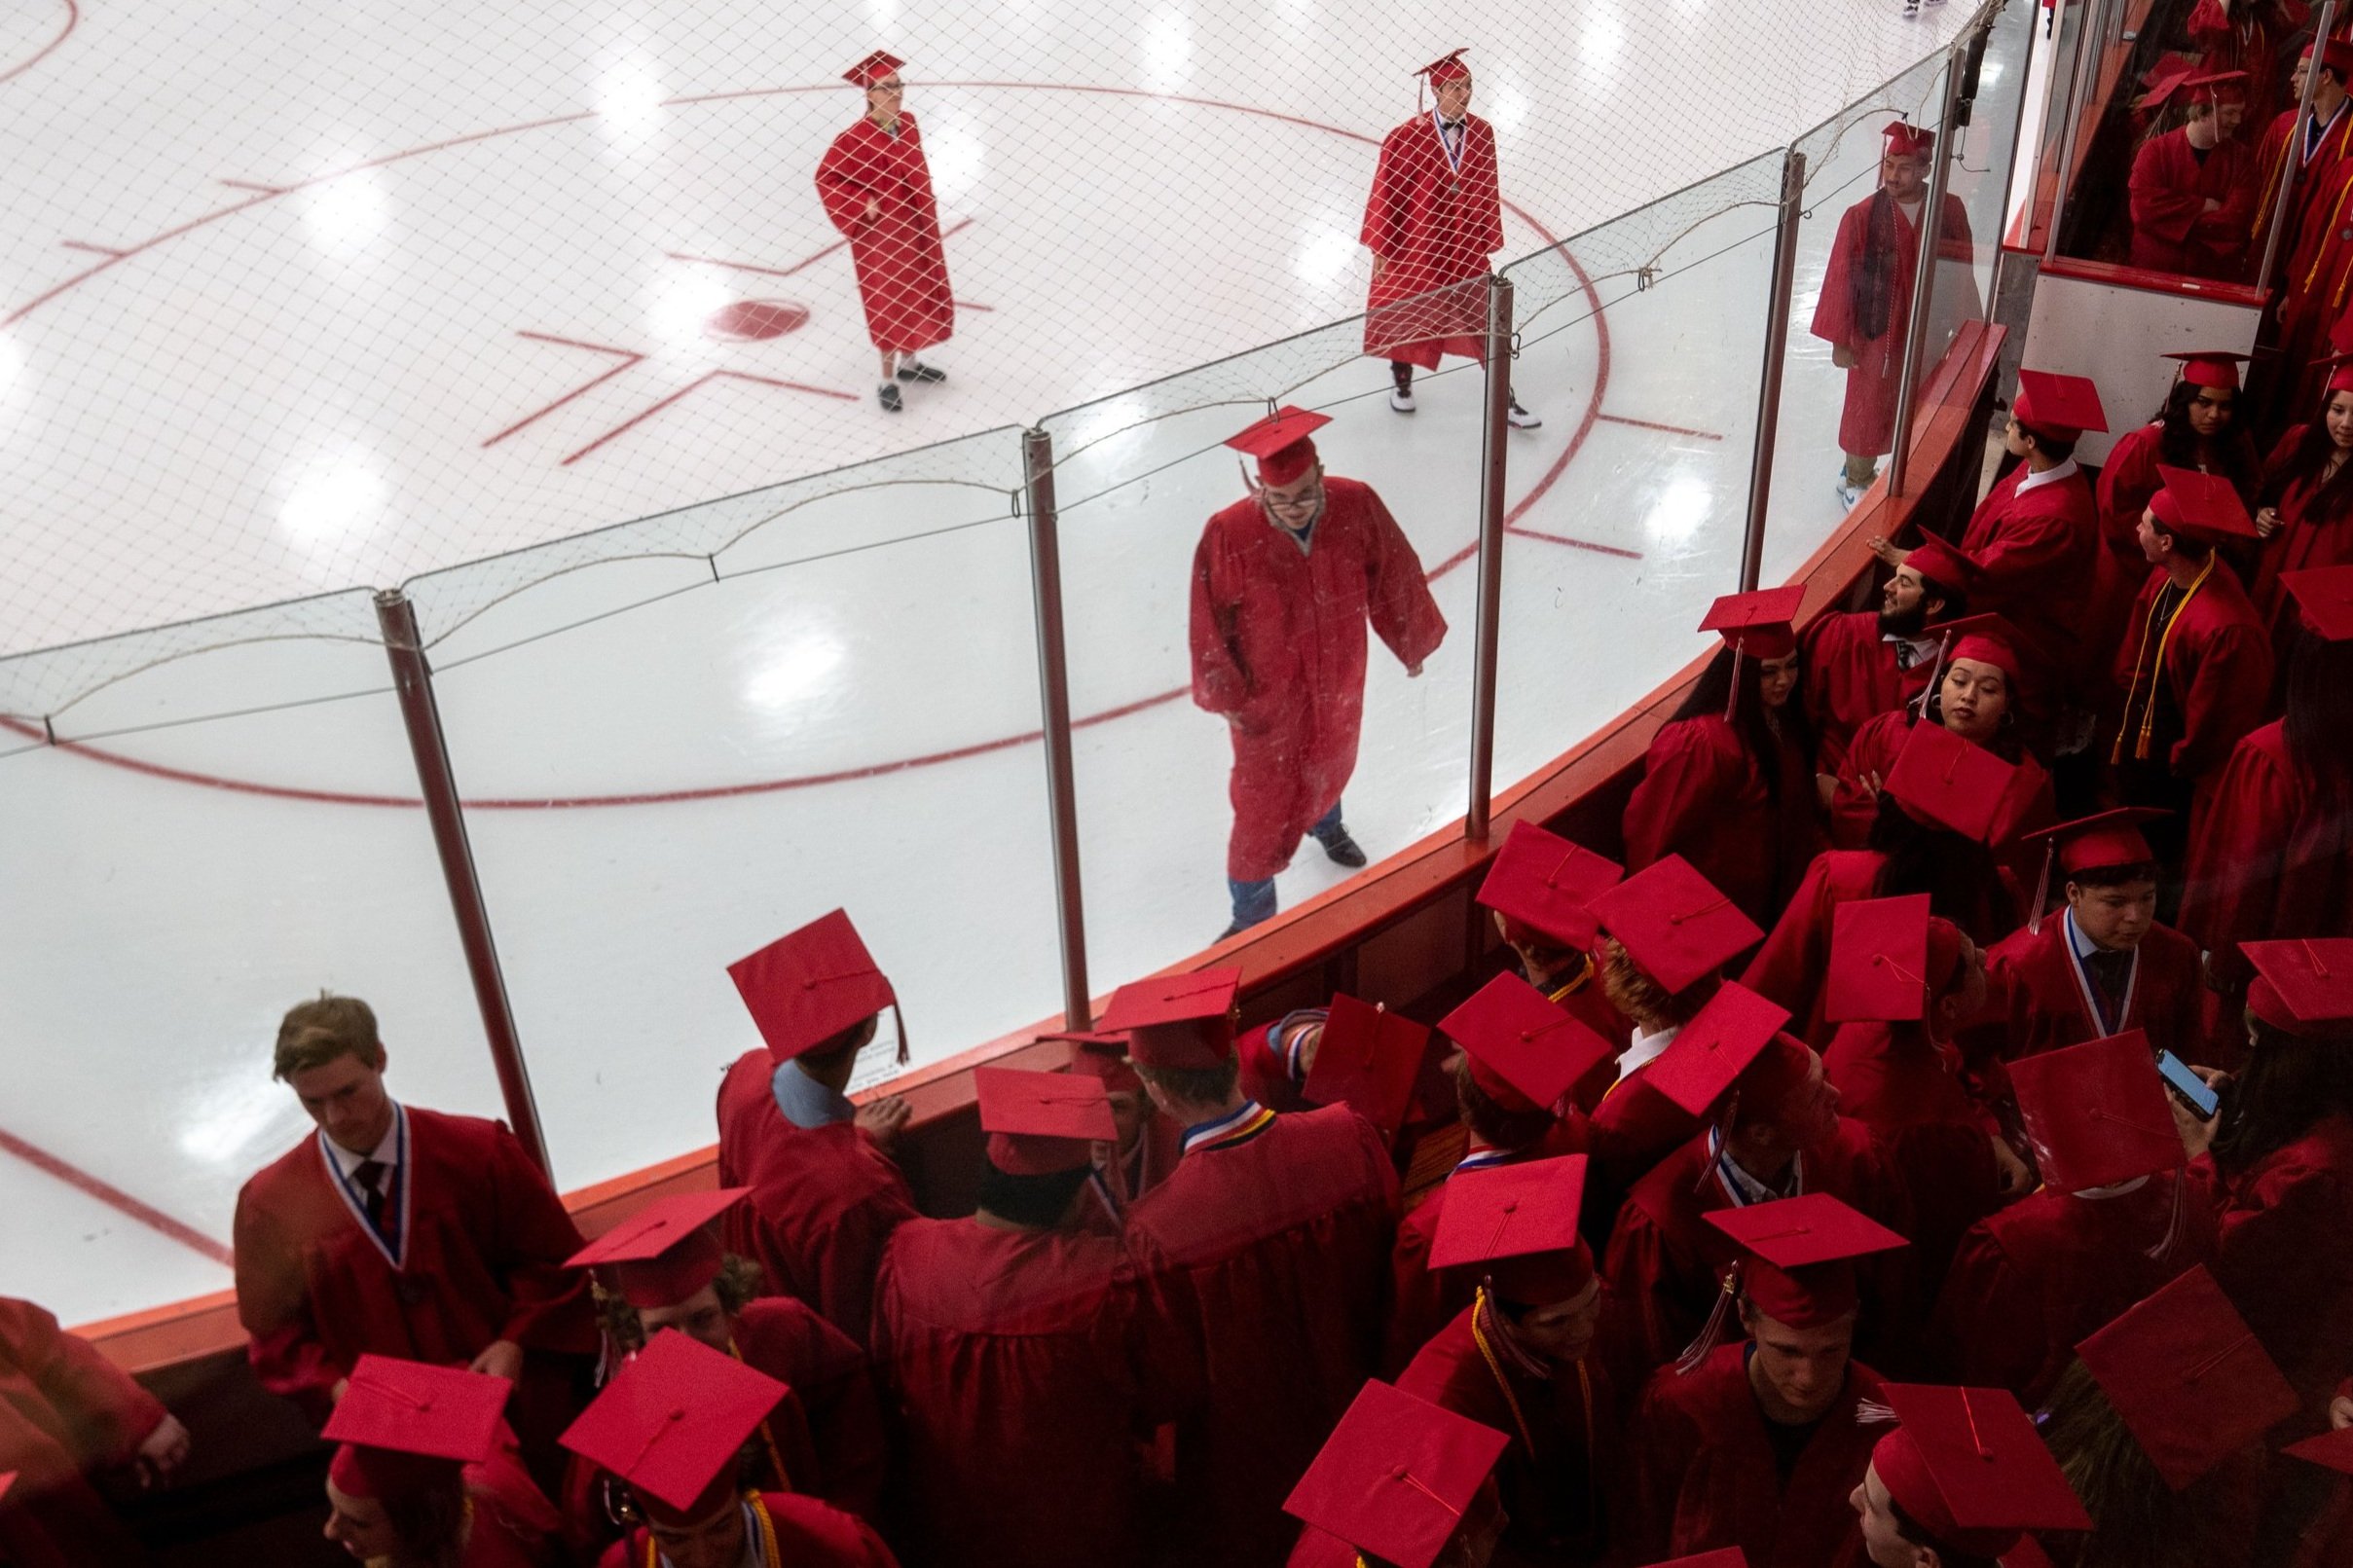  Willmar Senior High School students walk on ice before entering their commencement ceremony Sunday, June 5, 2022 at the Willmar Civic Center Arena in Willmar, Minn.  